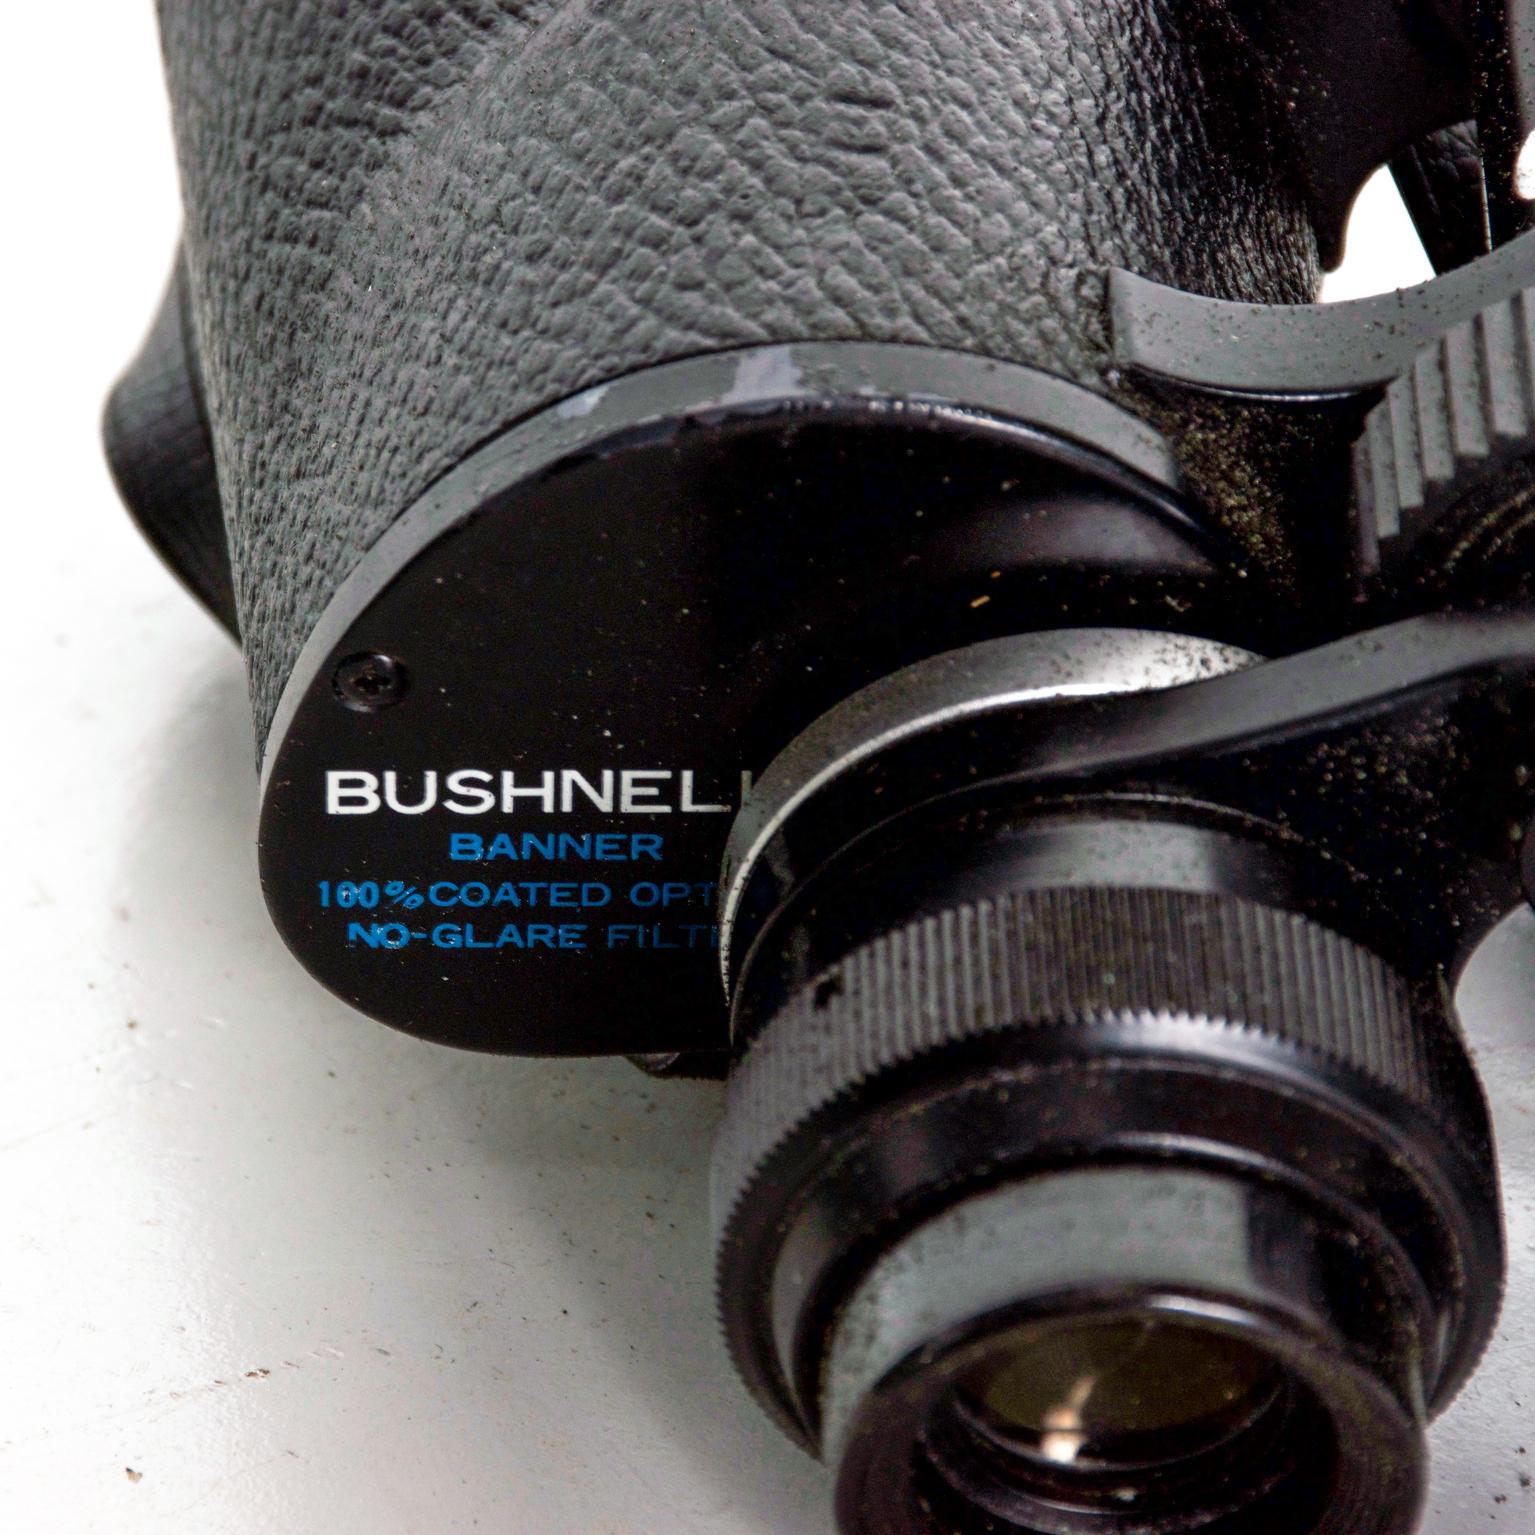 Wow Vintage Binoculars Bushnell with Original Case Dimensions are: 7